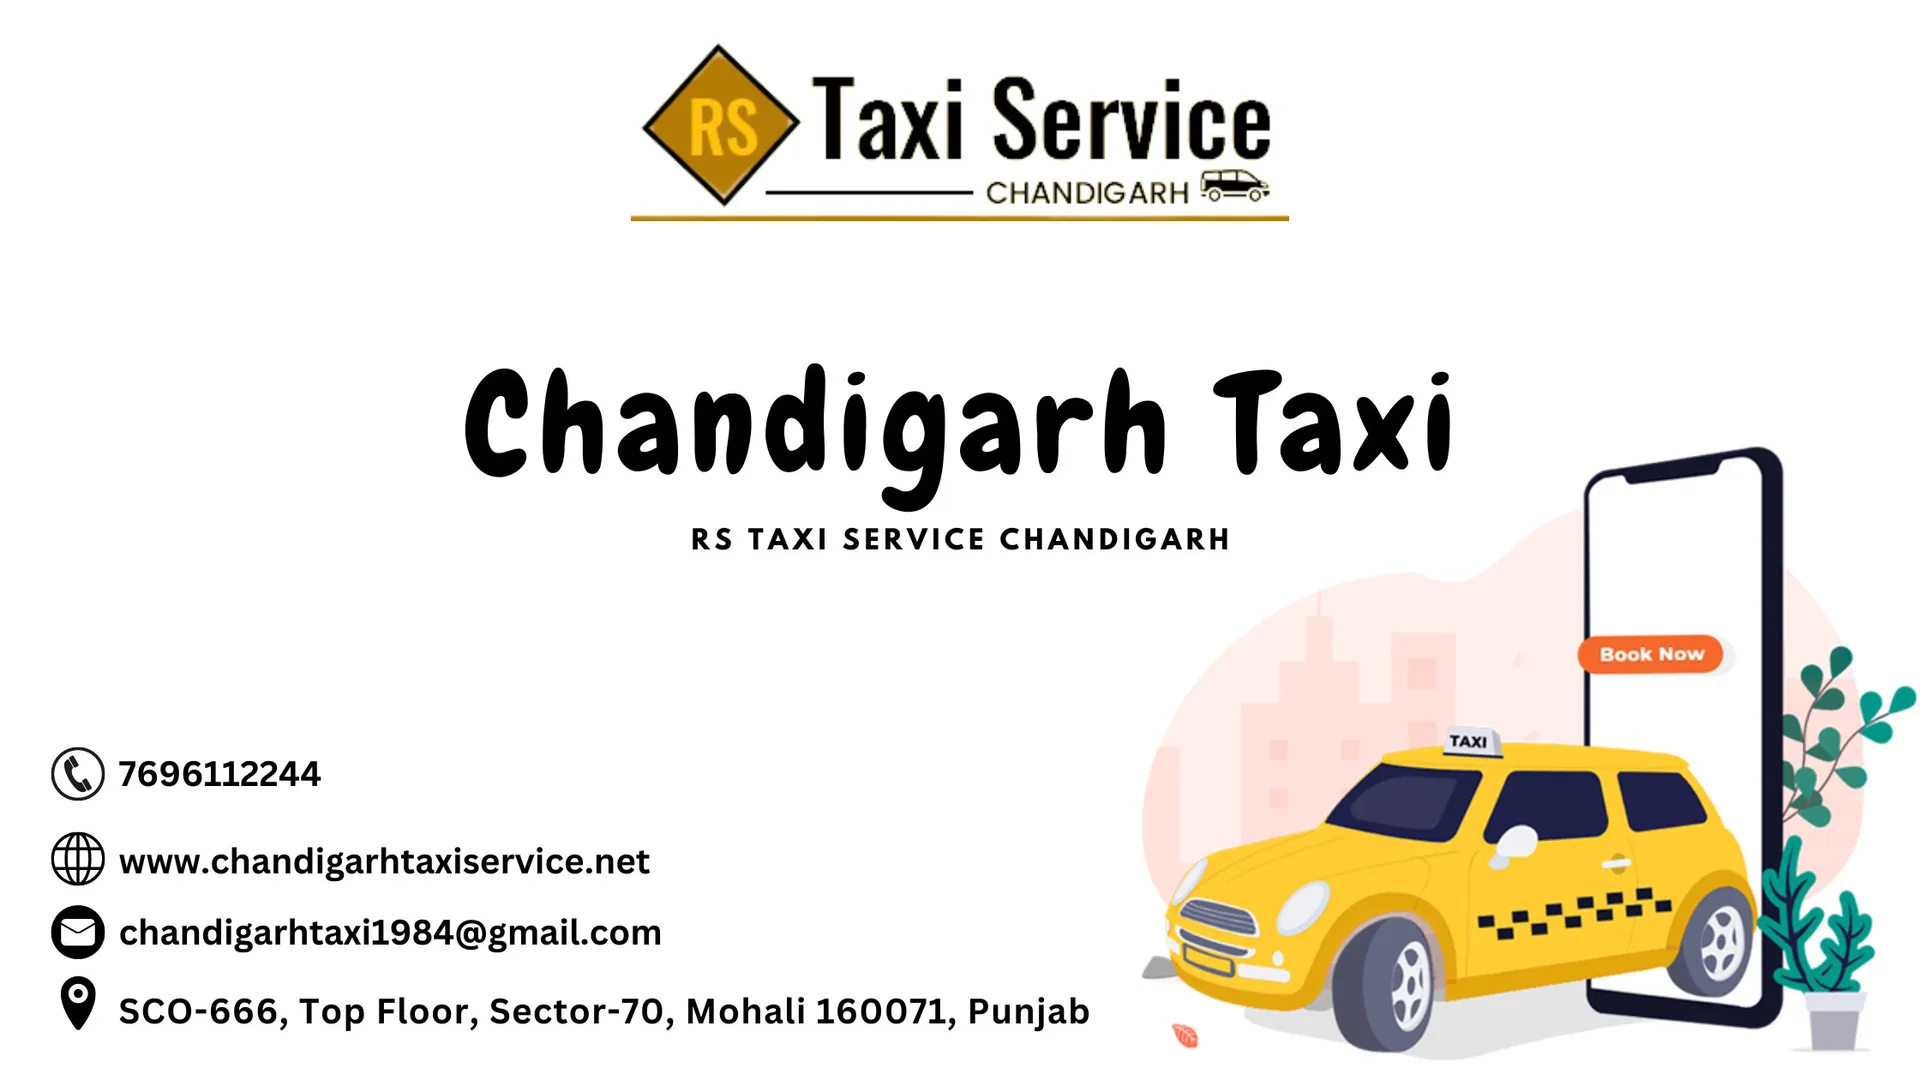 Experience convenience and comfort with RS Taxi Service, your trusted Chandigarh taxi provider. Our well-maintained fleet and skilled drivers ensure a safe and enjoyable journey in and around Chandigarh.

Whether it’s airport transfers, city exploration, or outstation travel, we offer a hassle-free and punctual experience. With transparent pricing and easy booking, your travel plans are in expert hands. Choose RS Taxi Service for a memorable ride that prioritizes your comfort and convenience.

Book your Chandigarh taxi today and enjoy a smooth and delightful travel experience with us.

Contact Person Name:- Ravi Salaria
Contact no. 7696112244
Address:- SCO-666, Top Floor, Sector-70, Mohali 160071, Punjab
Website:- https://www.chandigarhtaxiservice.net/
Email:- chandigarhtaxi1984@gmail.com